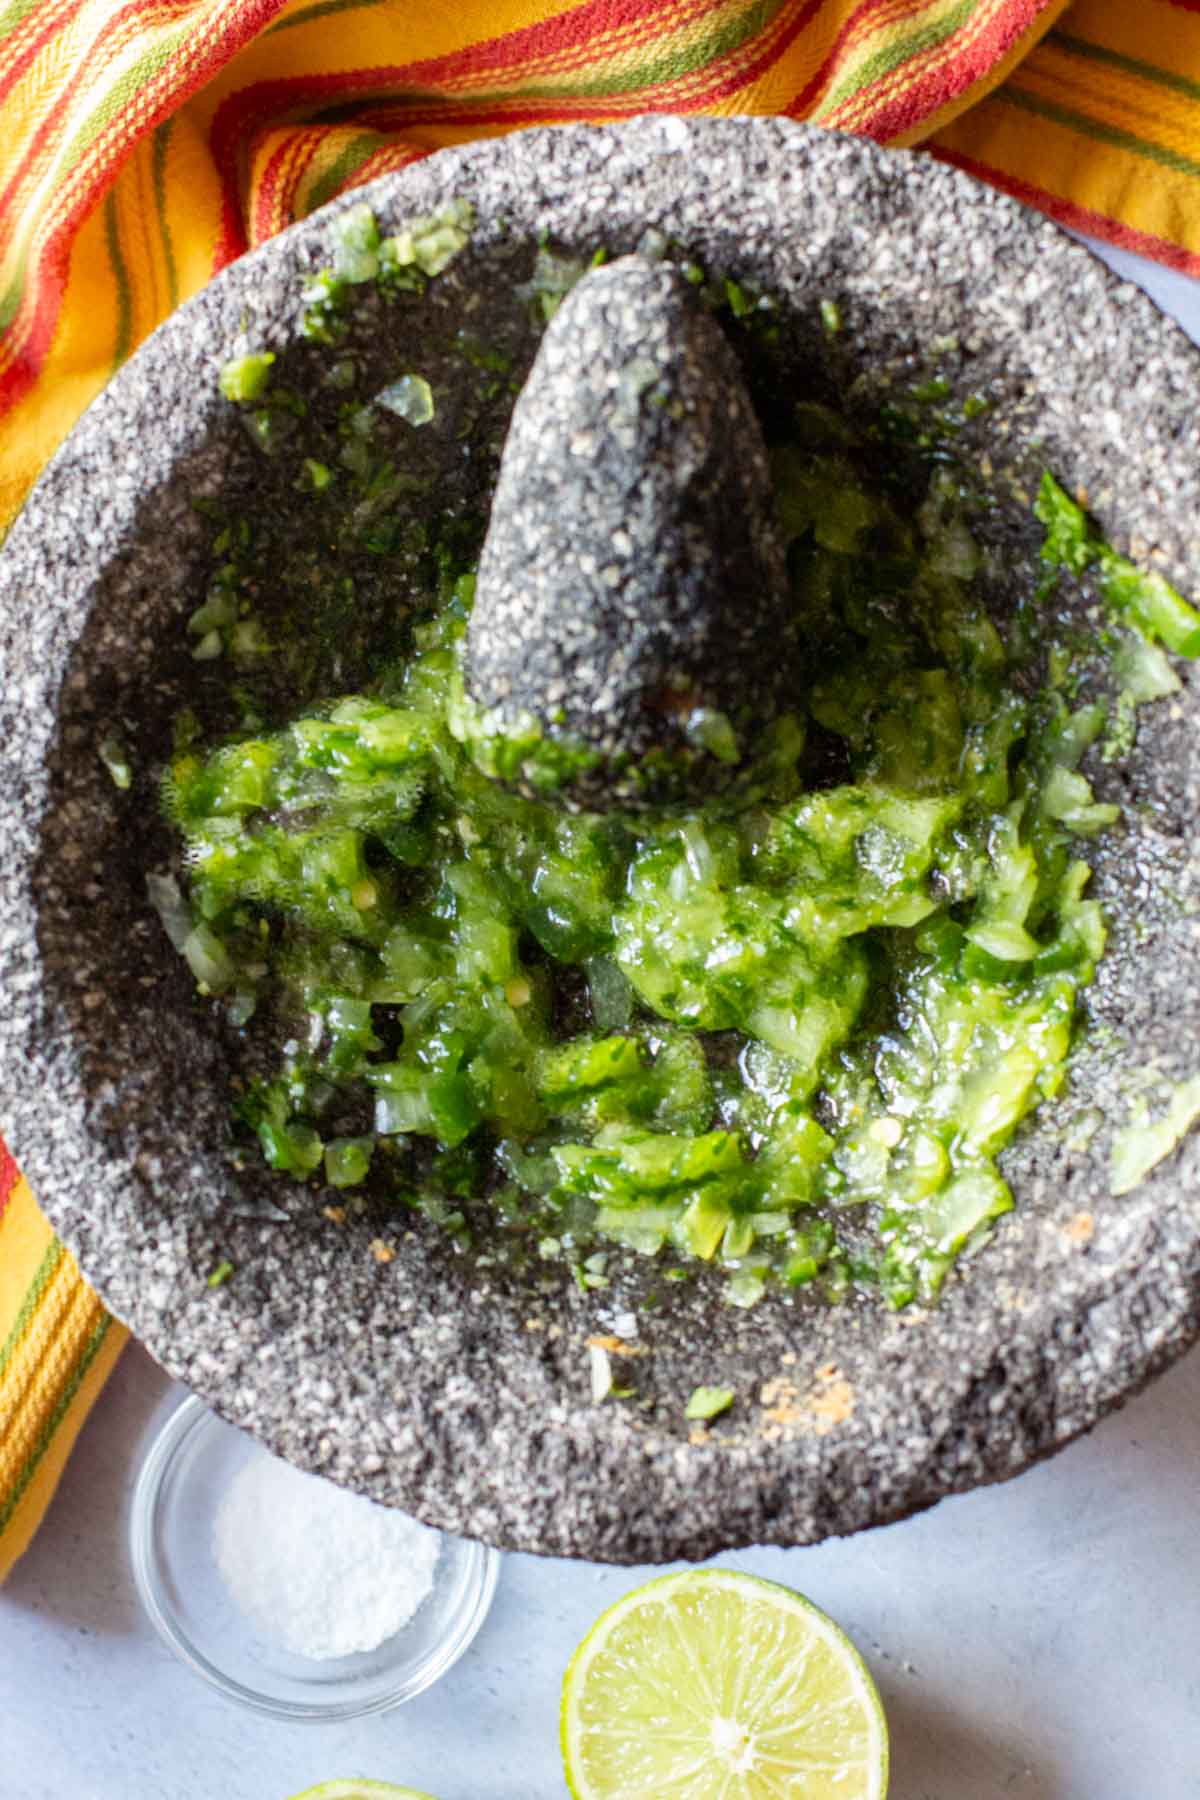 Grinding vegetables and spices in a molcajete to make chunky guacamole.